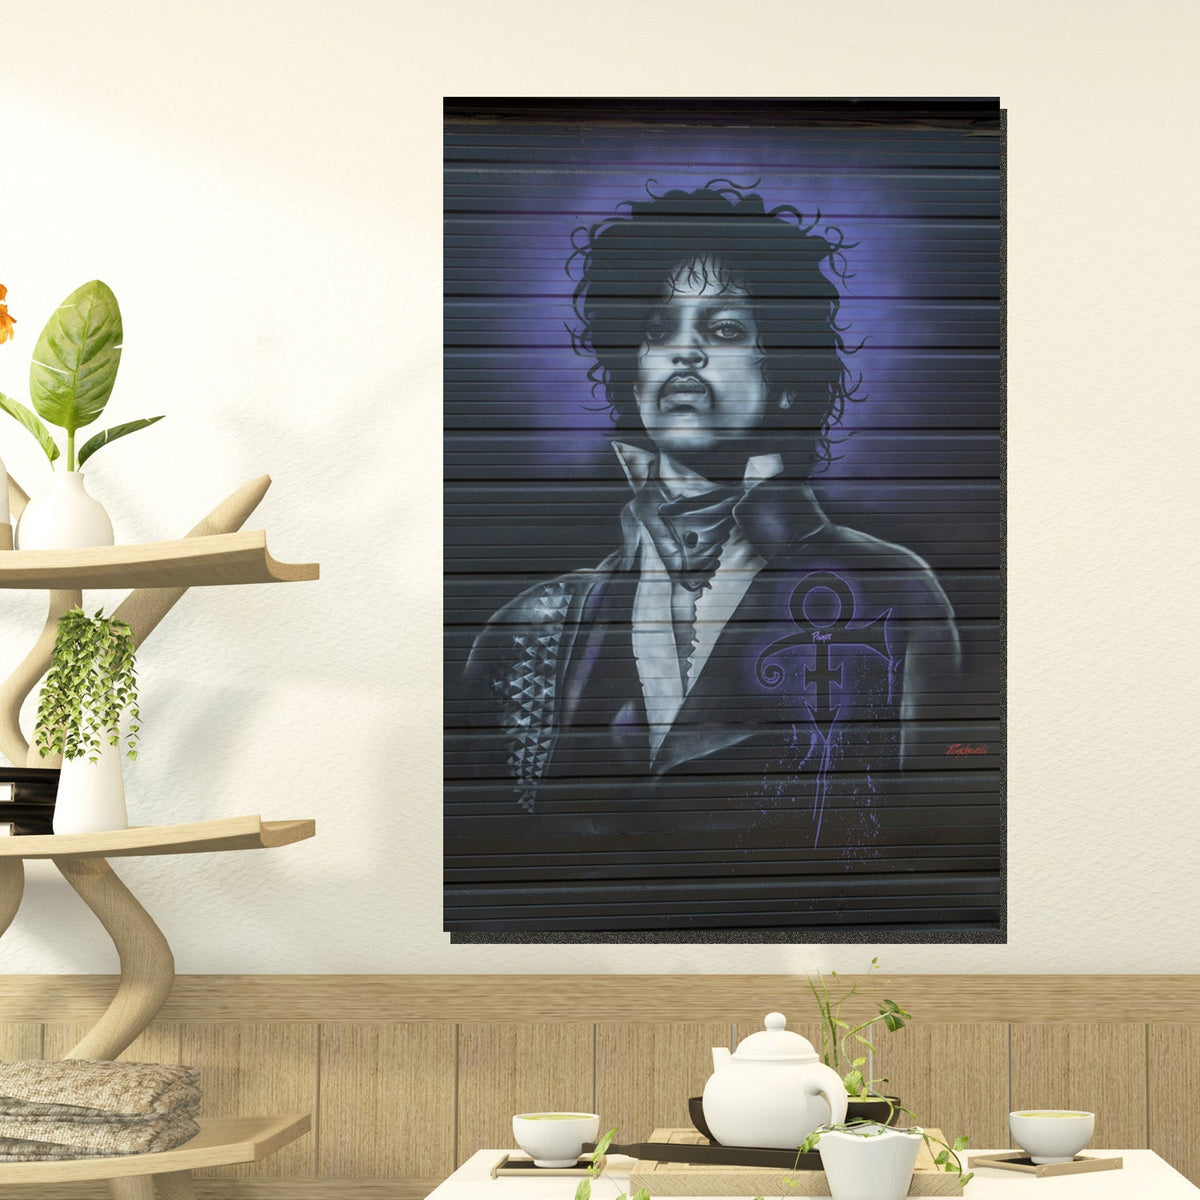 https://cdn.shopify.com/s/files/1/0387/9986/8044/products/PrinceCanvasArtPrintStretched-3.jpg